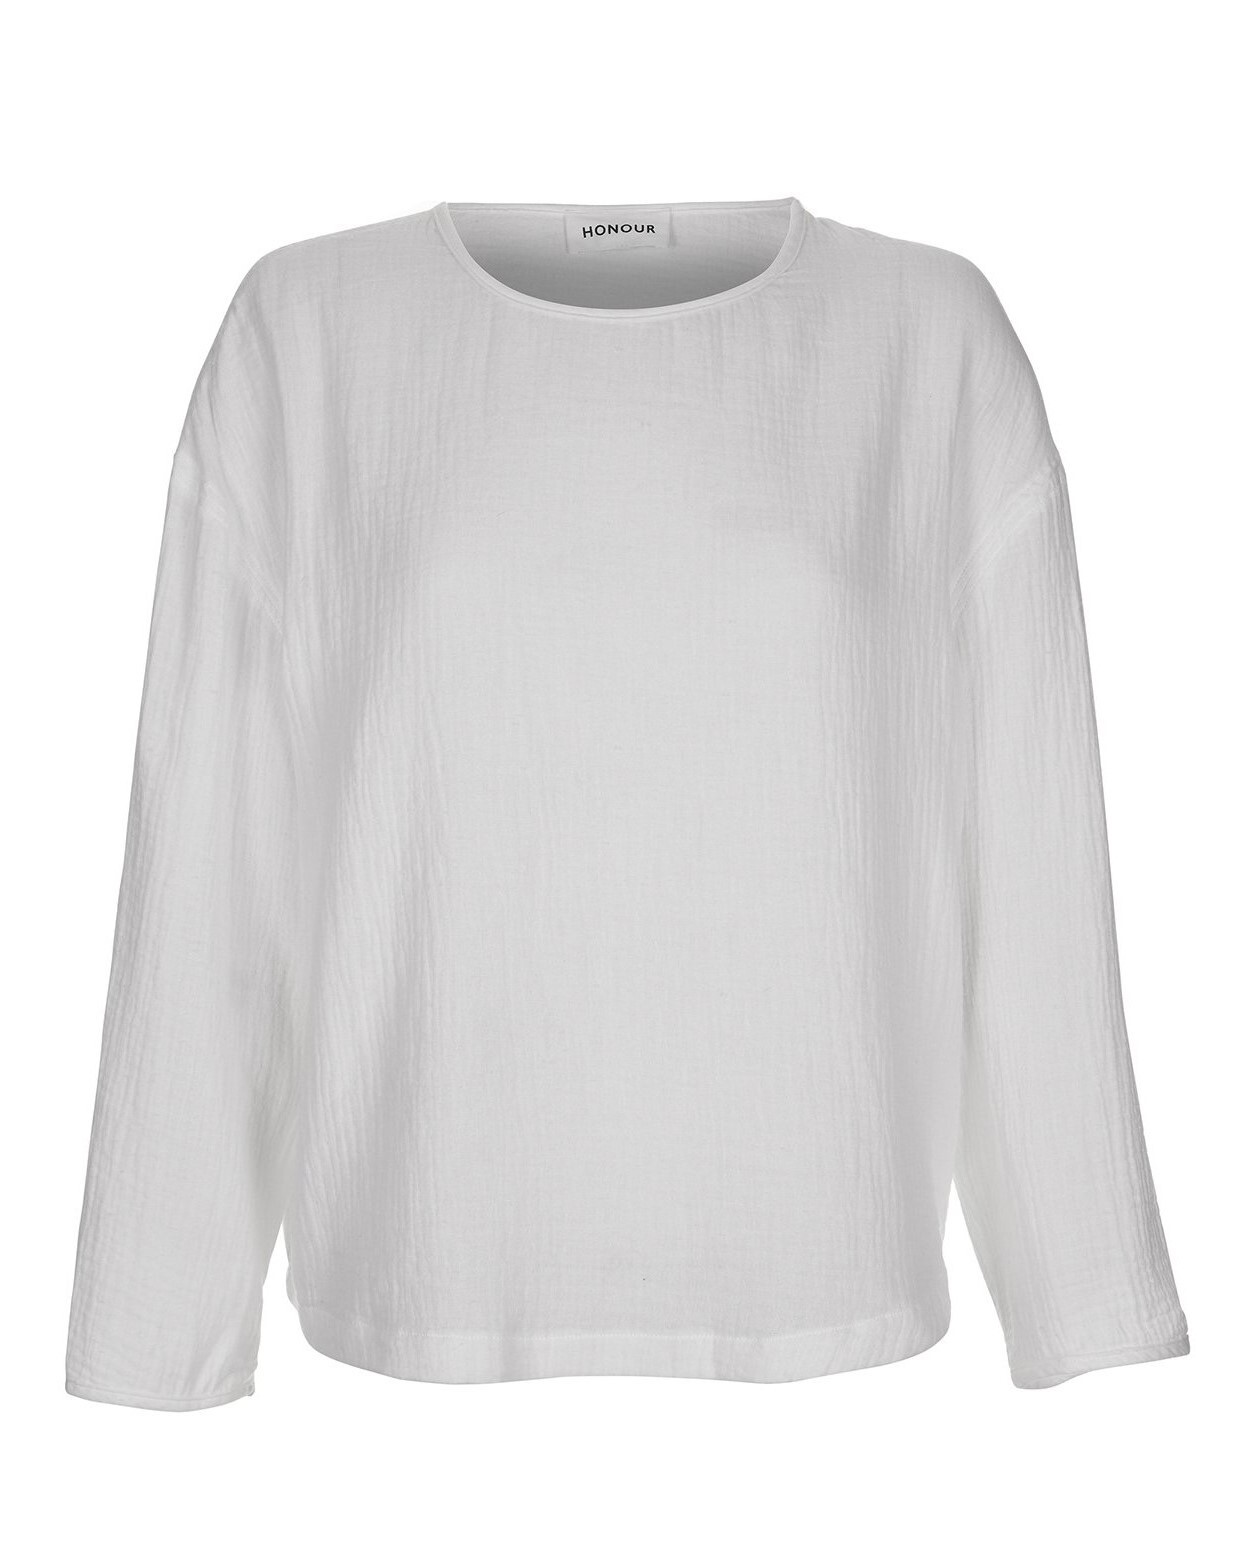 LALA TOP (WHITE)- HONOUR APPAREL SUMMER 21 Boxing Day Sale